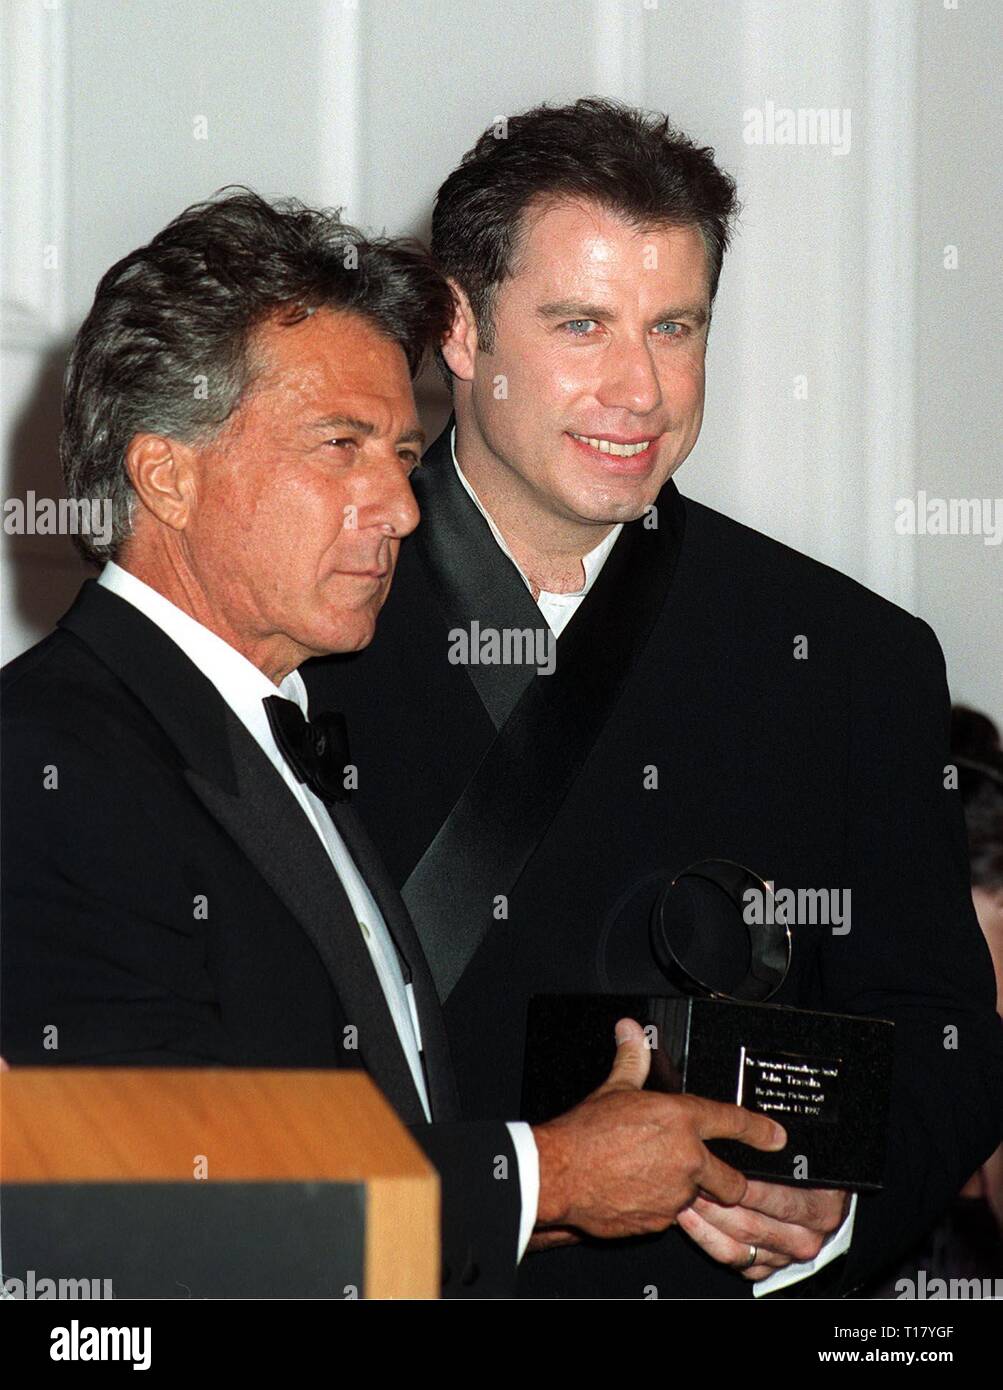 LOS ANGELES, CA. September 13, 1997:   Dustin Hoffman (left) presents John Travolta with the American Cinematheque Award at the Moving Picture Ball in Beverly Hills. They both star in the upcoming movie 'Mad City.' Stock Photo